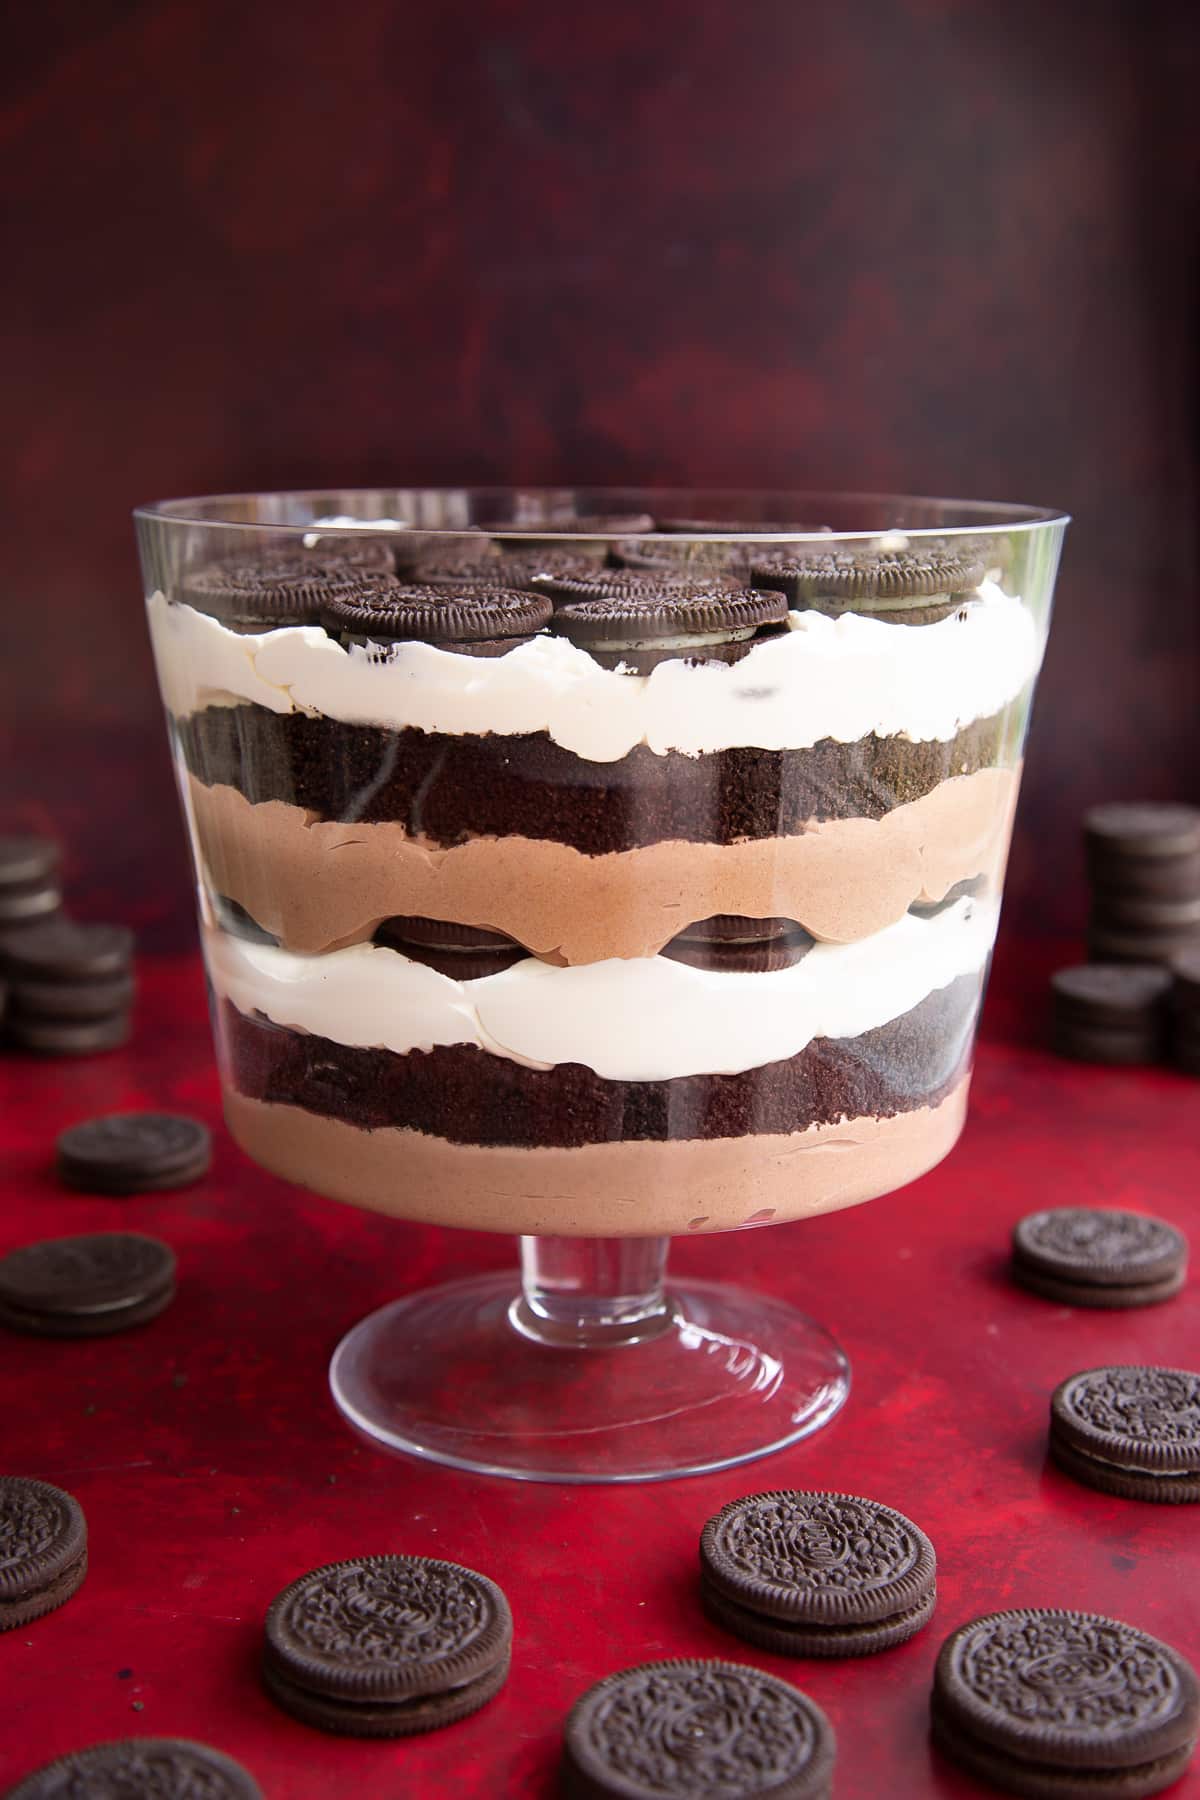 A layer of chocolate pudding, then crushed Oreos, then whipped cream, then Oreos, then chocolate pudding, then crushed Oreos, then cream, then Oreos in a trifle bowl.